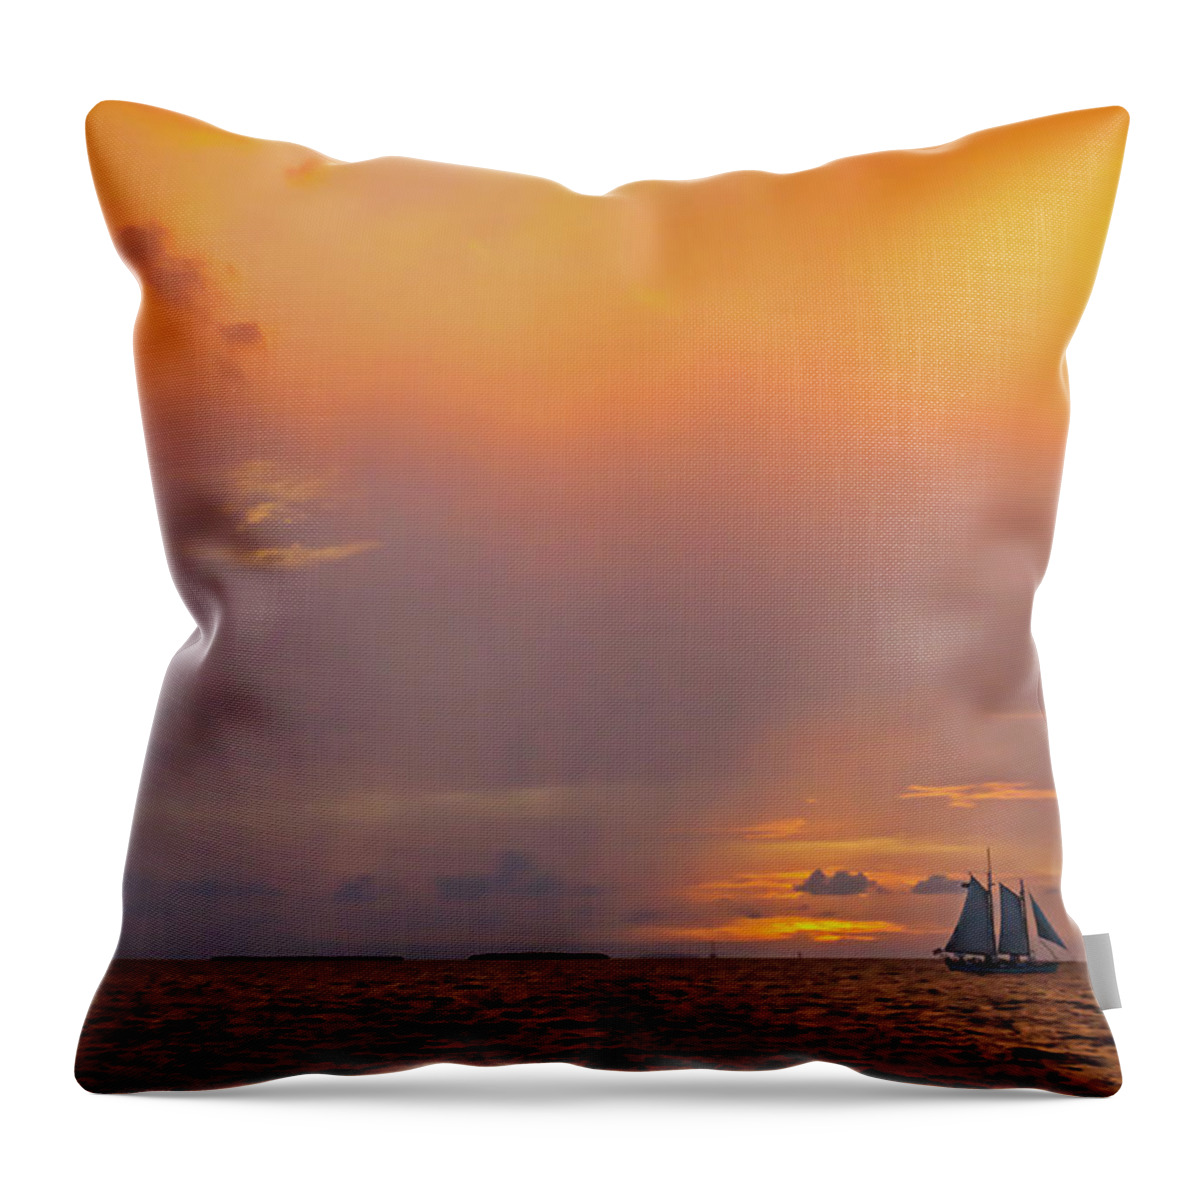 Key West Throw Pillow featuring the photograph Dramatic Sunset with sailing ship off the isle of Key West Florida by Photographic Arts And Design Studio